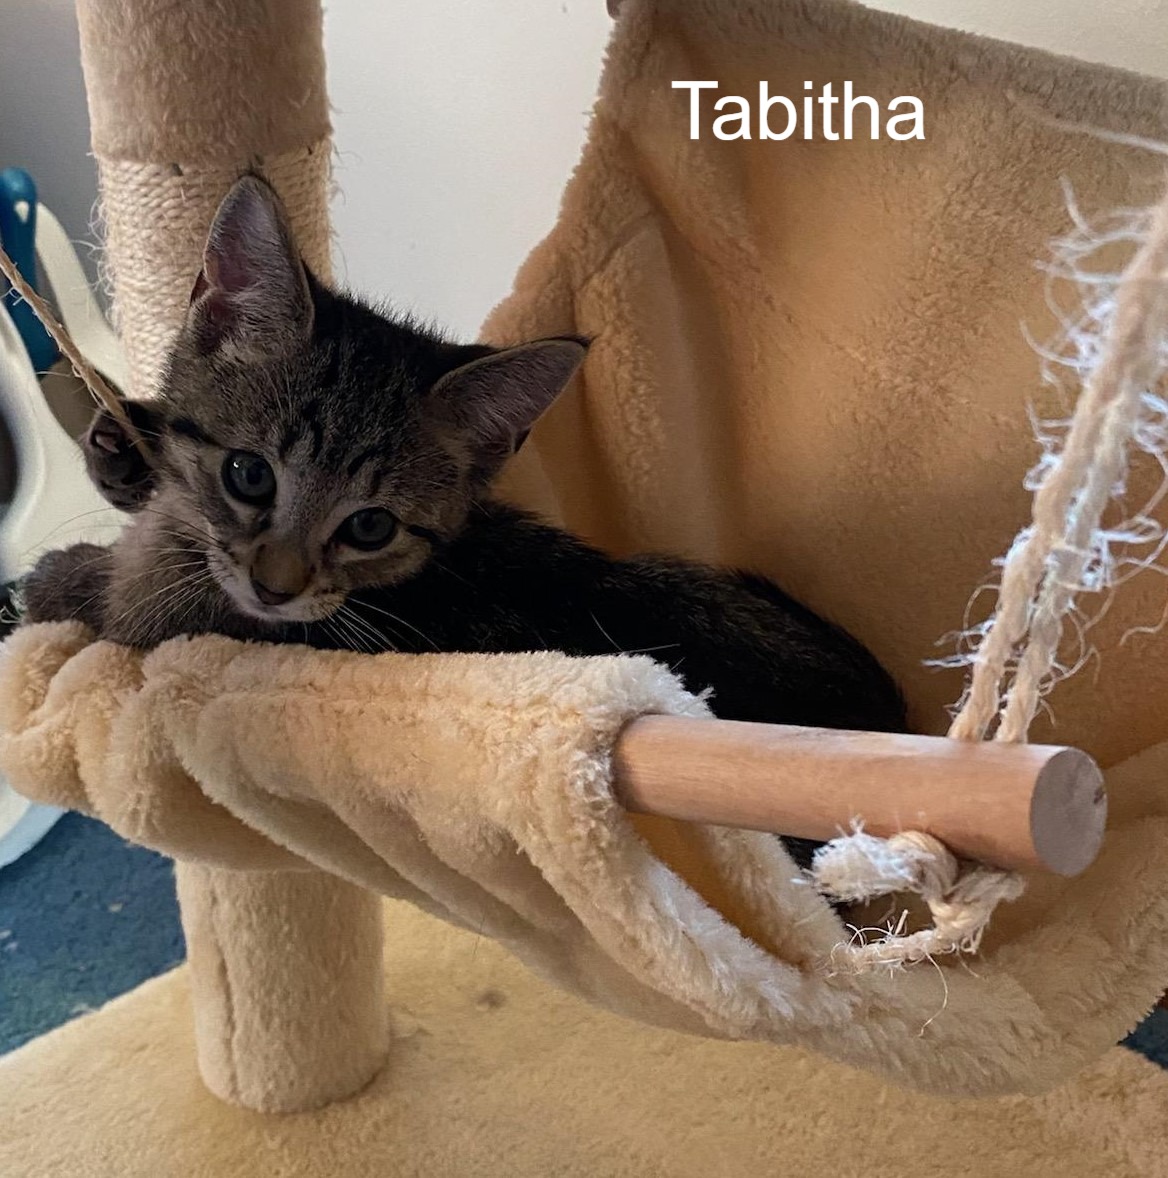 A picture of the kitten Tabitha